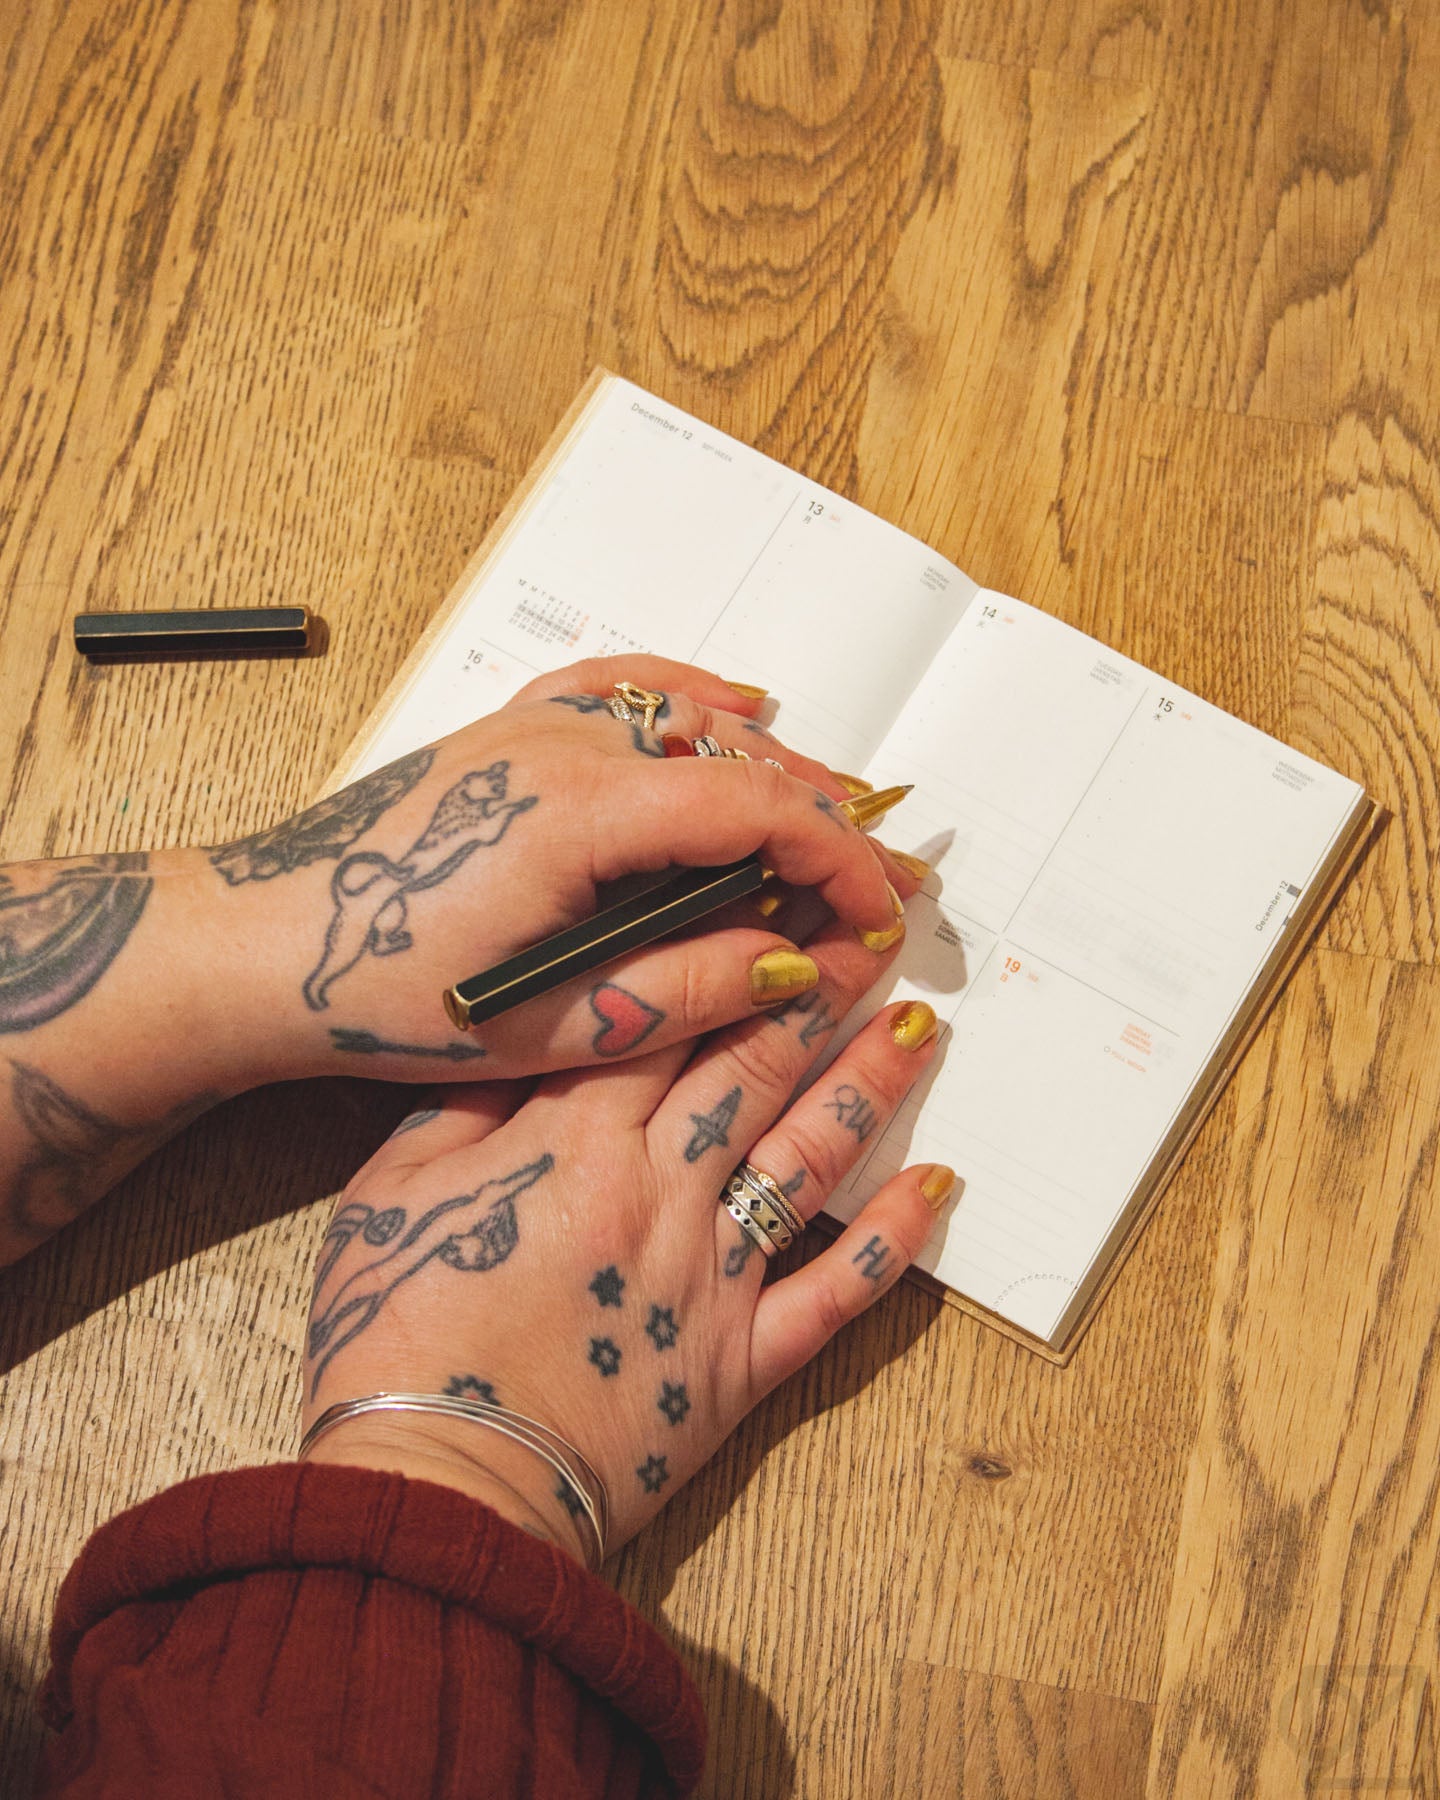 Alexandra has tattooed hands, golden nails, and lots of jewelry that matches the golden theme of her planner